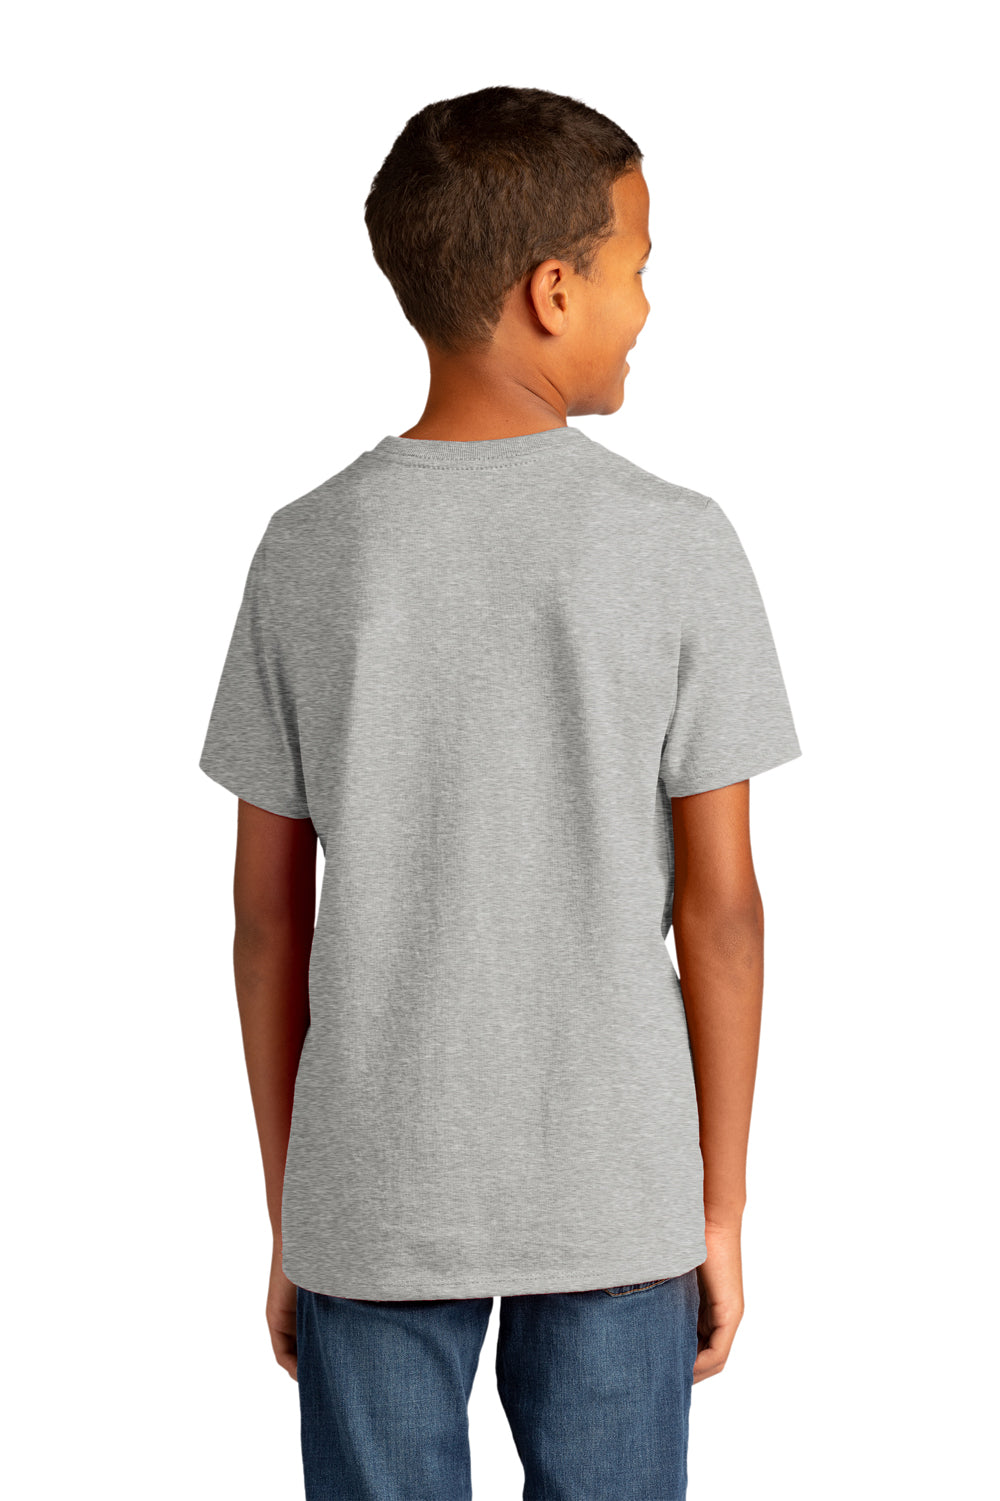 District Youth Re-Tee Short Sleeve Crewneck T-Shirt Heather Light Grey Side